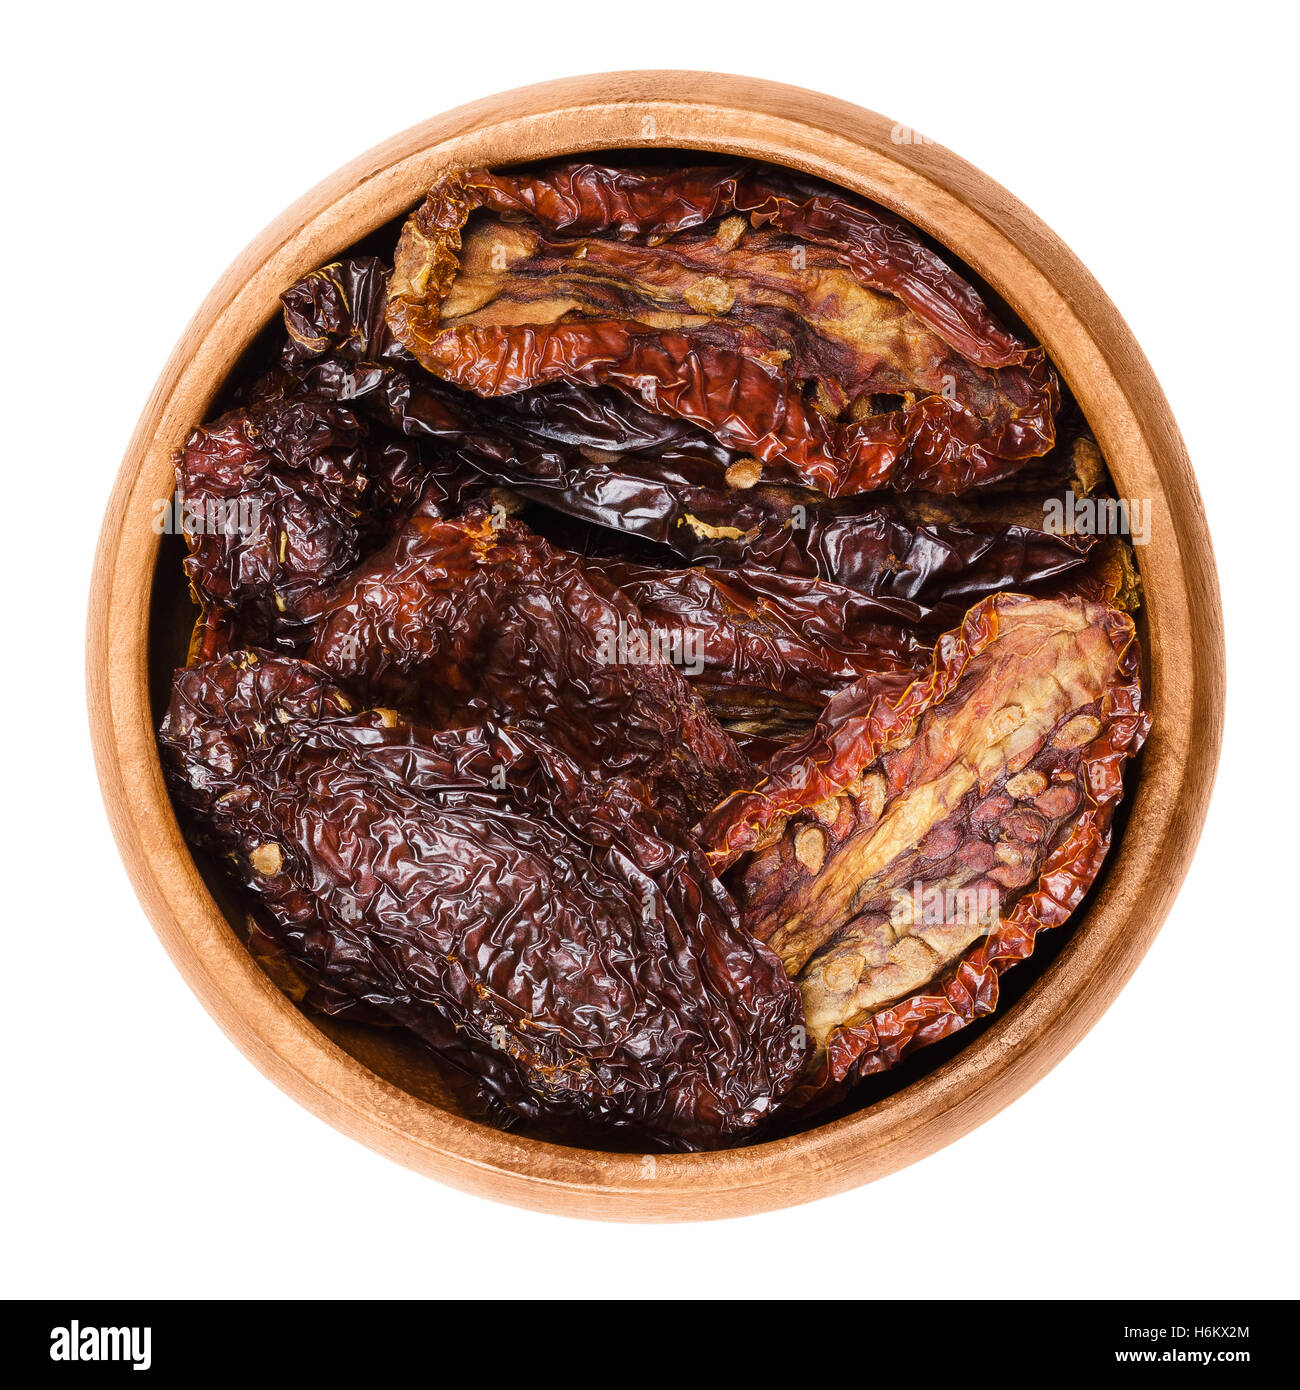 Sun dried tomatoes in wooden bowl on white background. Ripe tomatoes lost most of their water after drying in the sun. Stock Photo